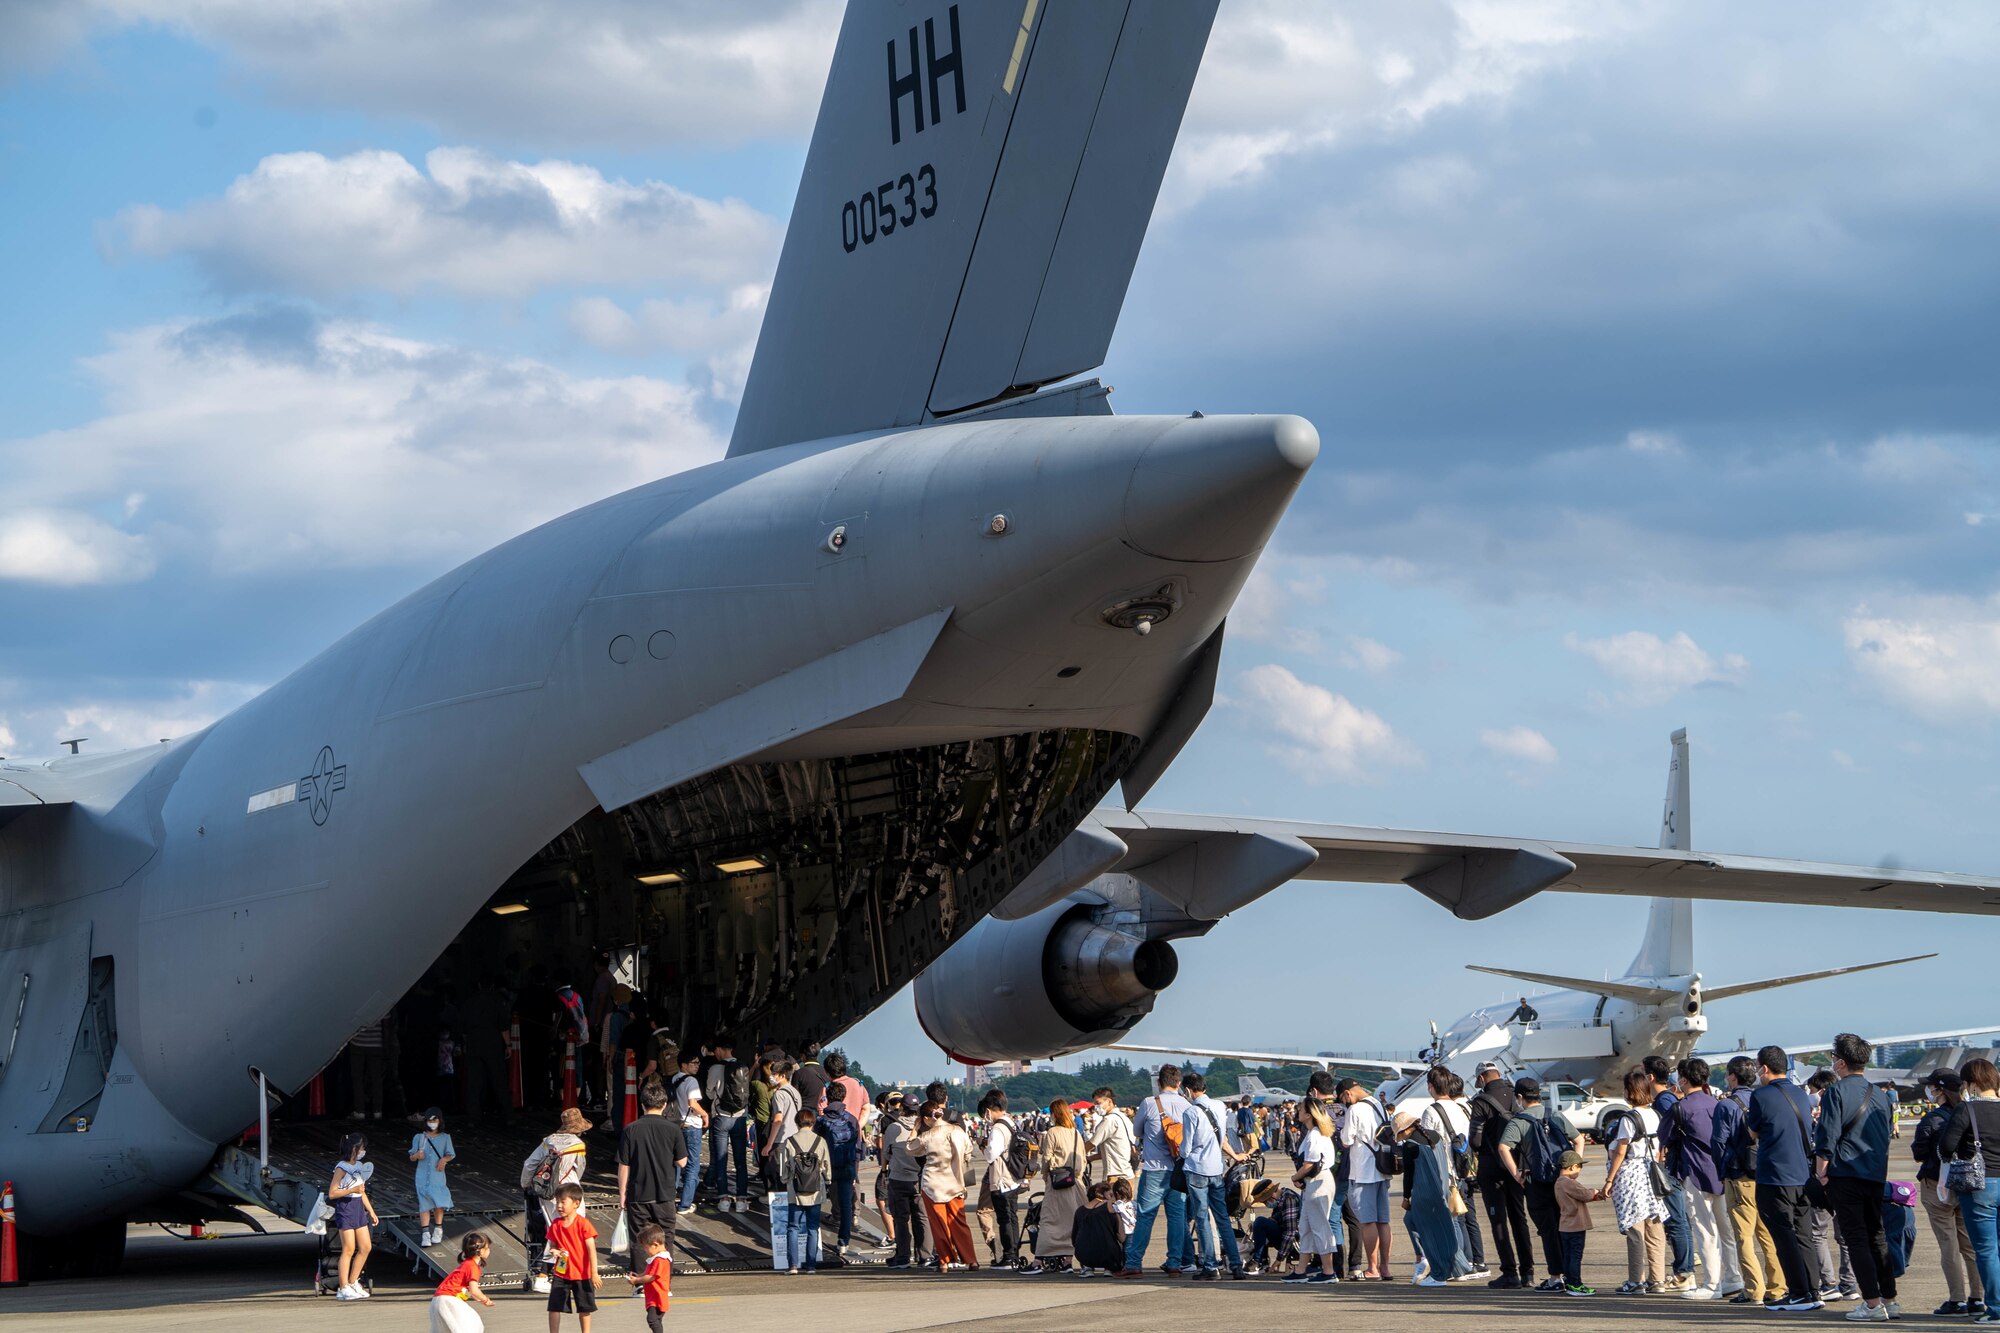 Festival visitors wait in line to tour the C-17 Globemaster III during the Friendship Festival 2022, at Yokota Air Base, Japan, May 22, 2022. The festival embodied the true spirit of friendship, welcoming more than 110,000 Japanese neighbors to meet with our Airmen and tour static displays of U.S and Japanese Aircraft while sharing our cultures and stories. (U.S. Air Force photo by Airman 1st Class Makensie Cooper)